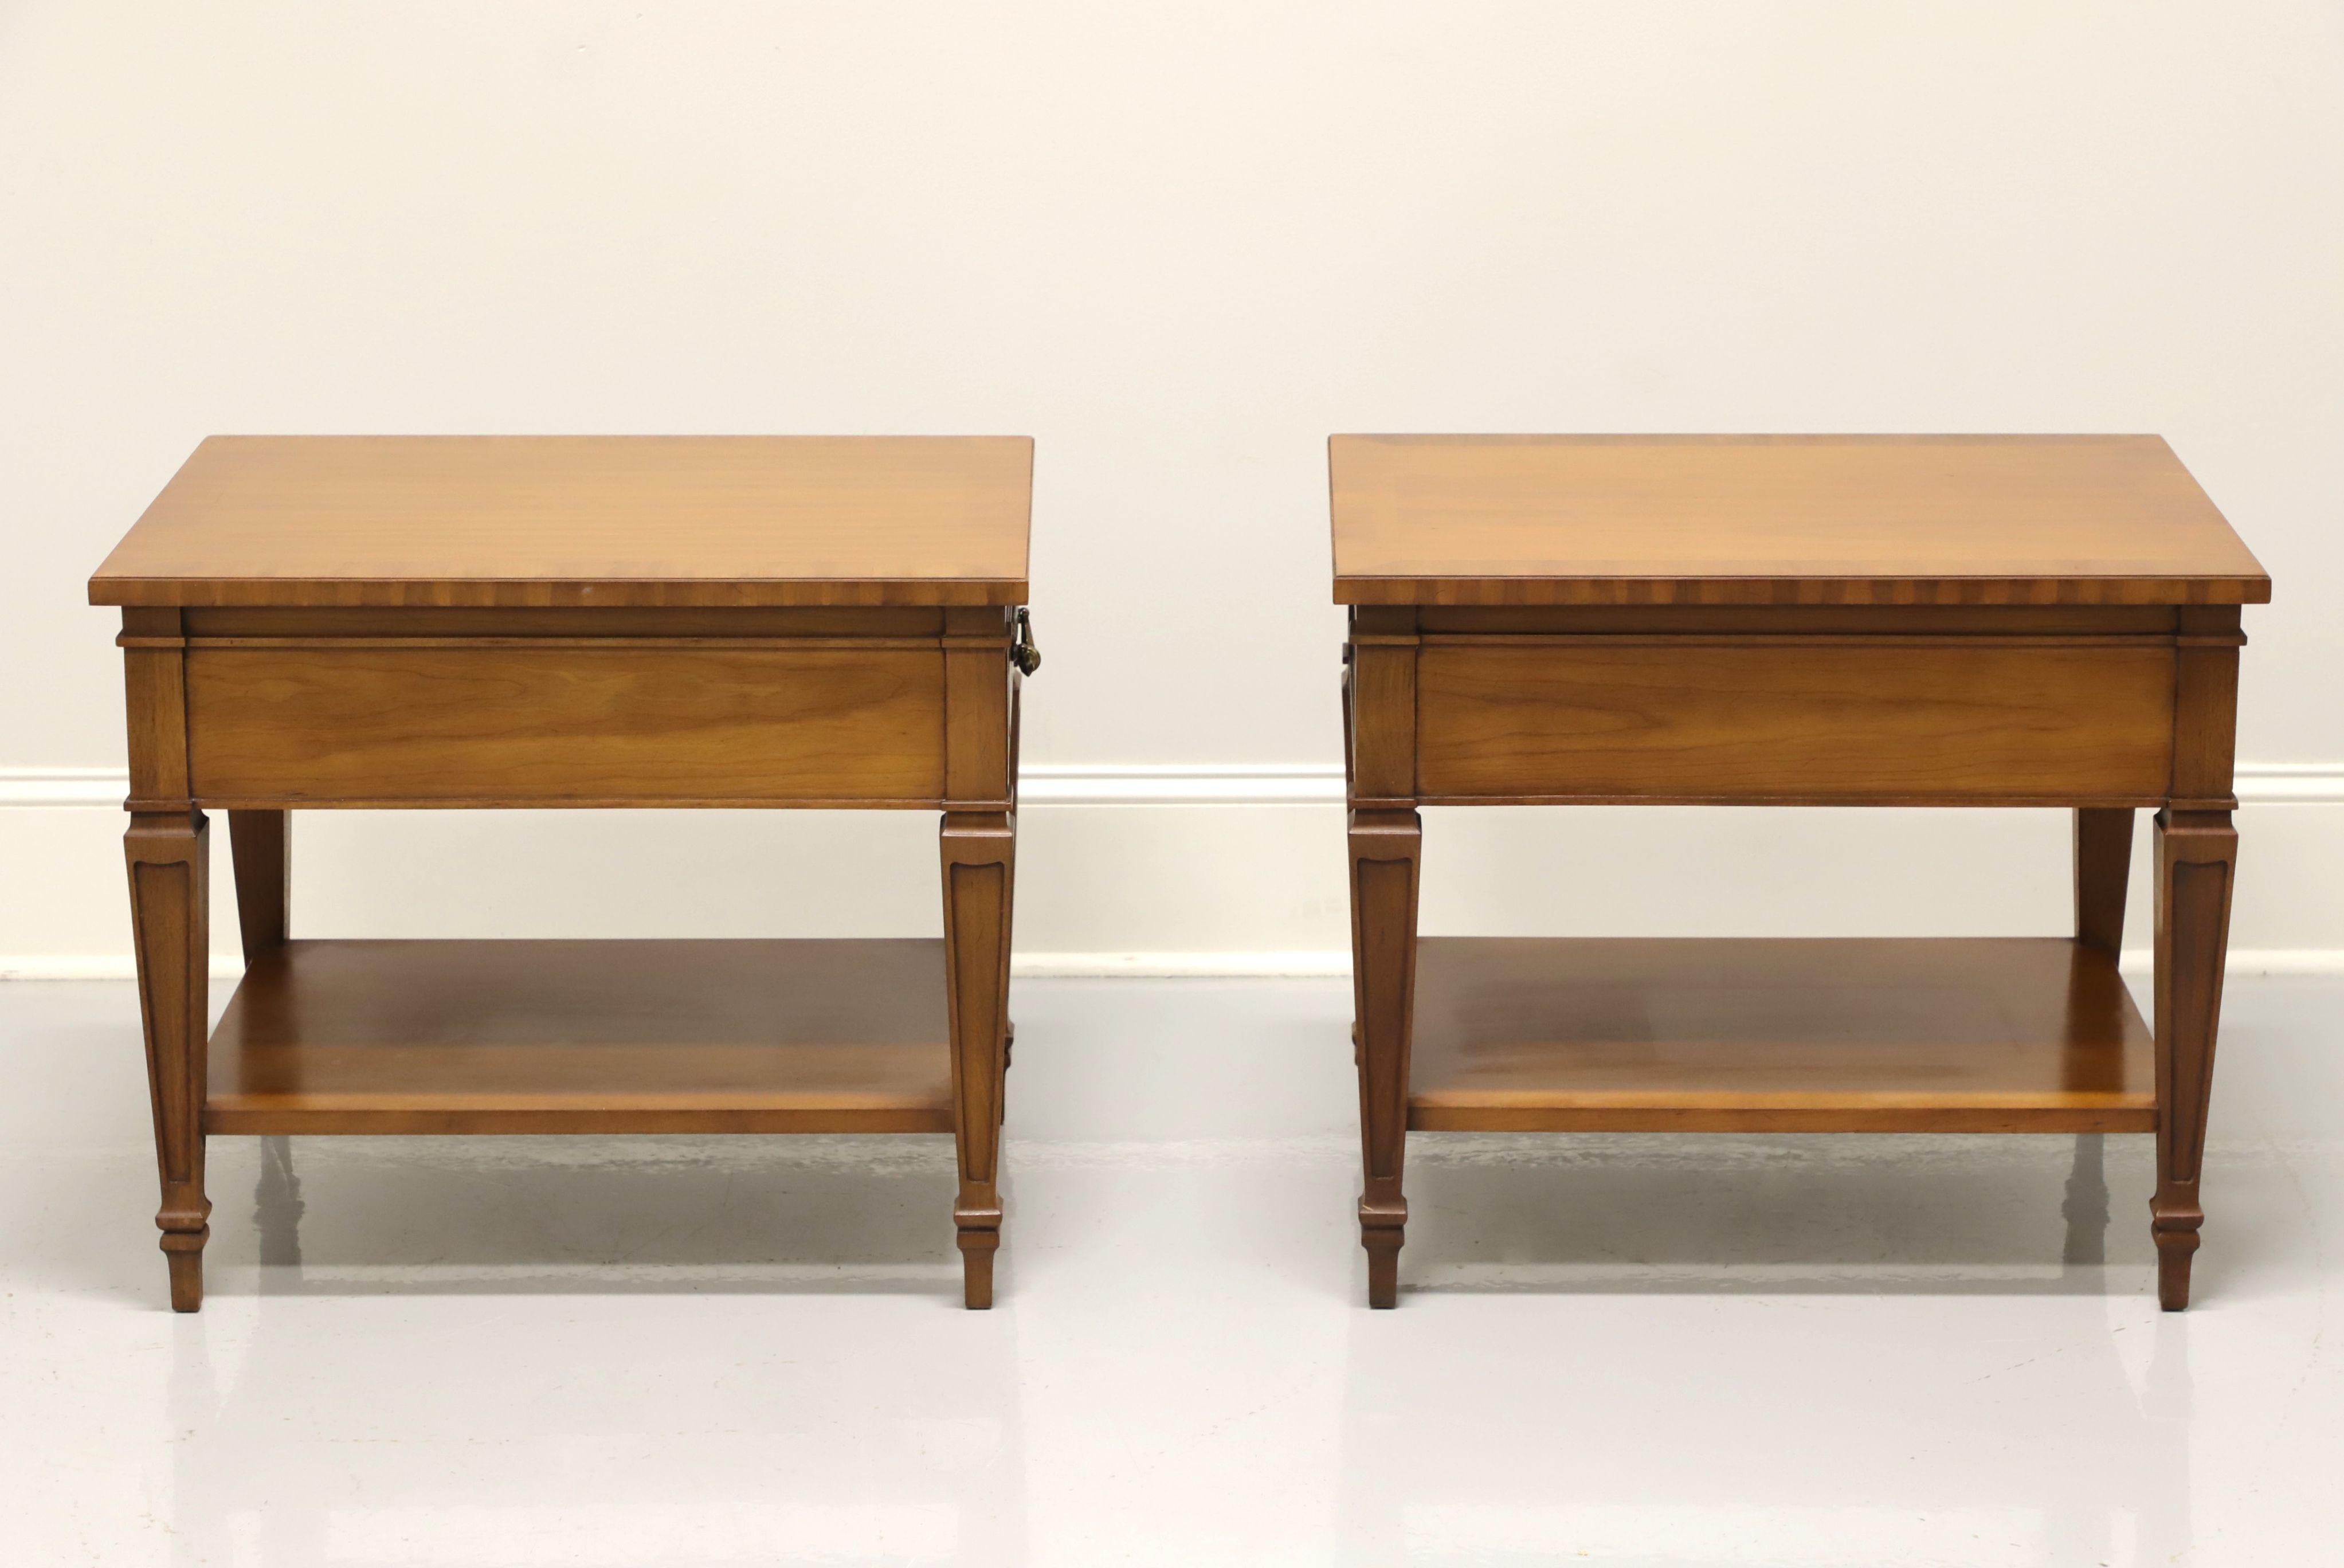 A pair of mid-century side tables by Drexel Heritage, from their Repertoire Collection. Walnut with banded top, brass hardware, undertier shelf and spade feet. Features burl to drawfront of one drawer of dovetail construction. Made in North